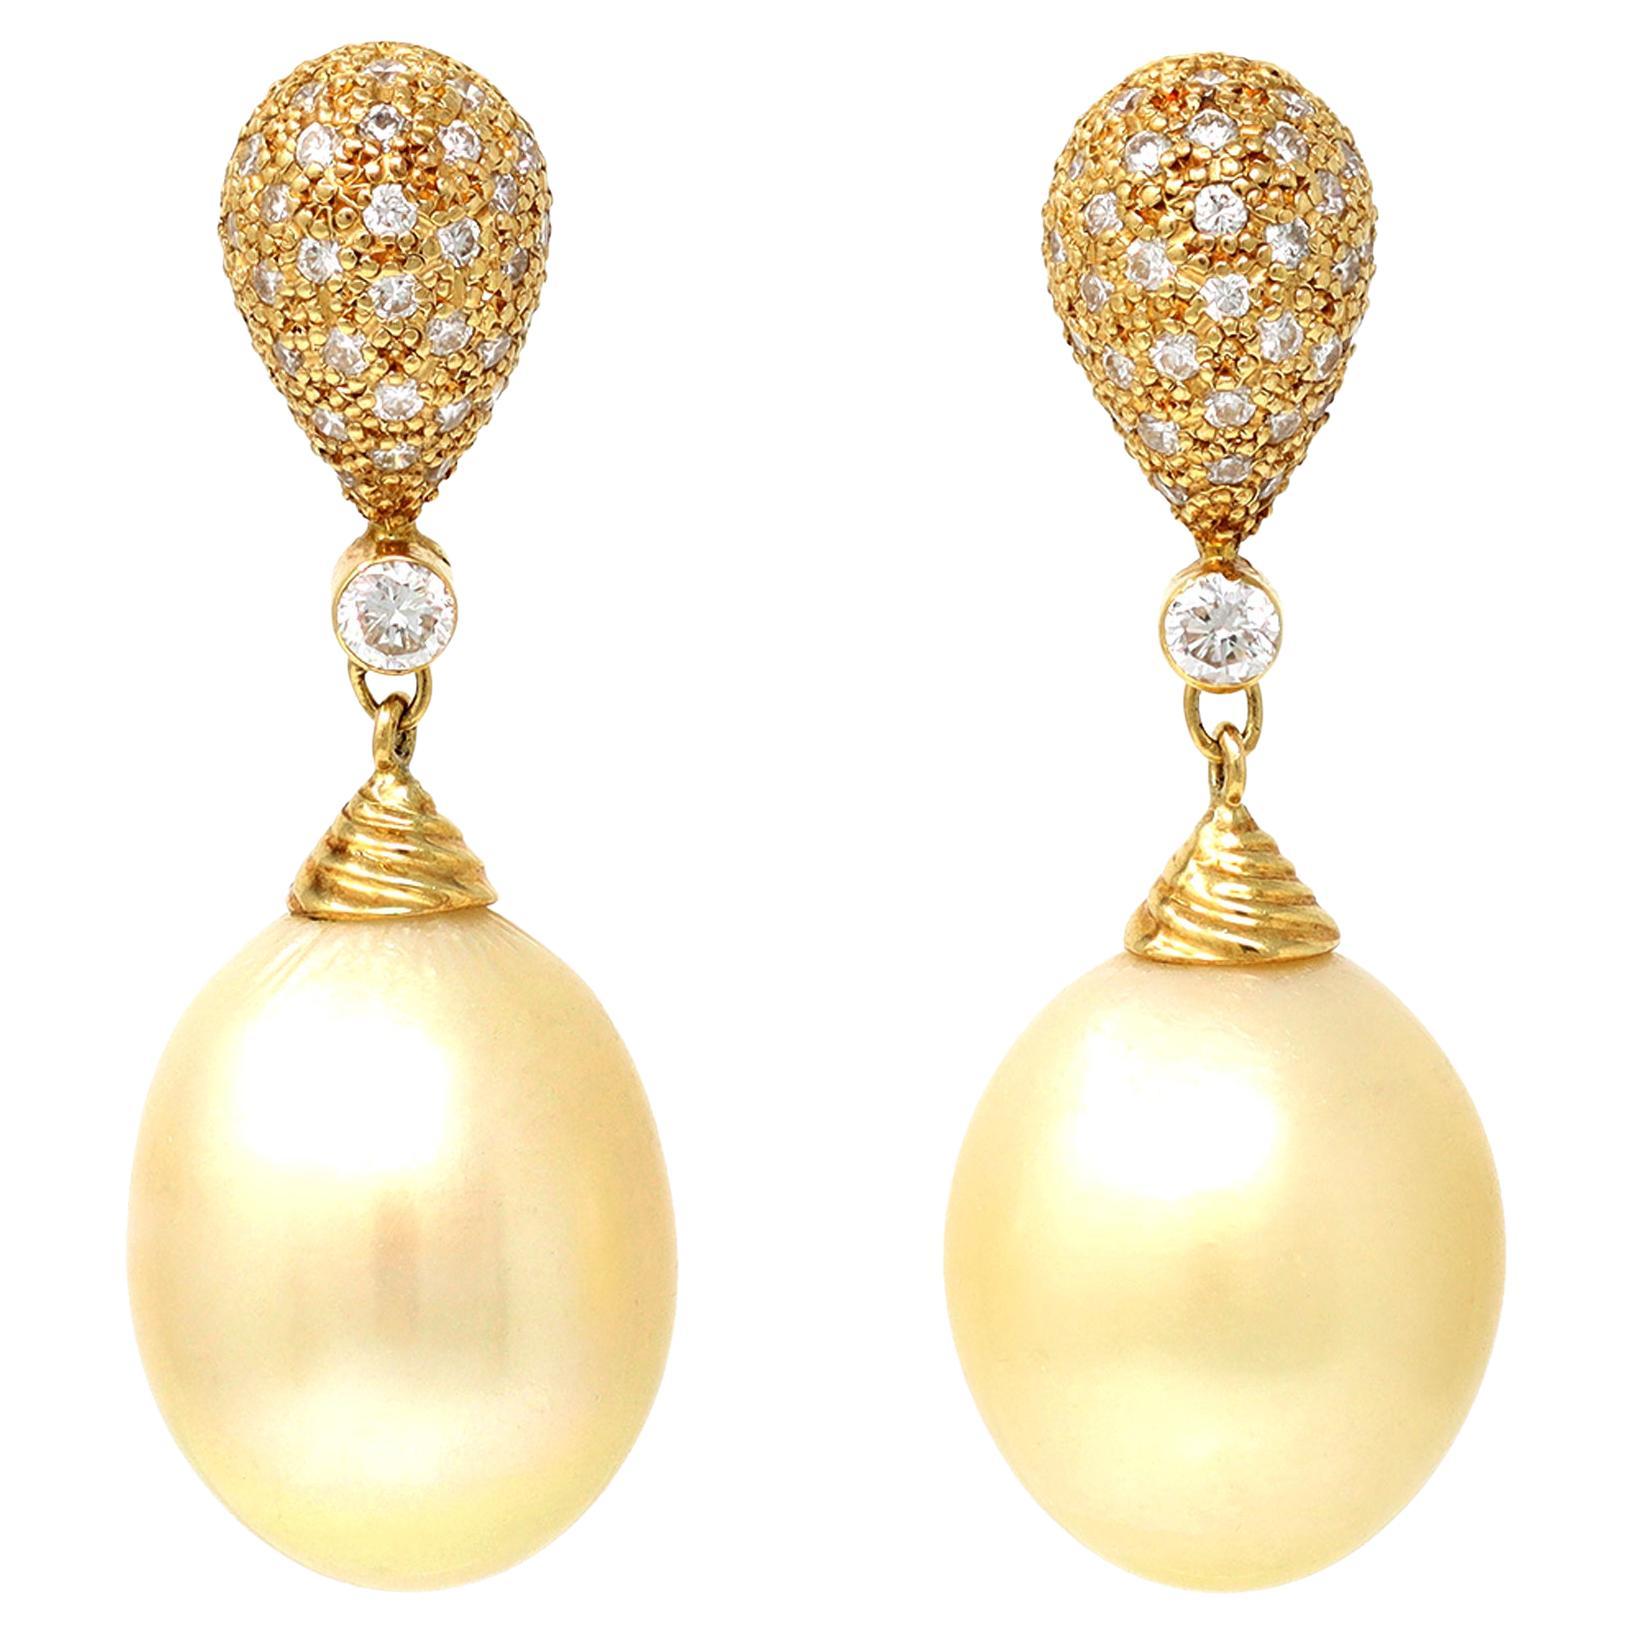 Pair of Champagne South Sea Pearl and Diamond Dangling Earrings in 18 Karat Gold